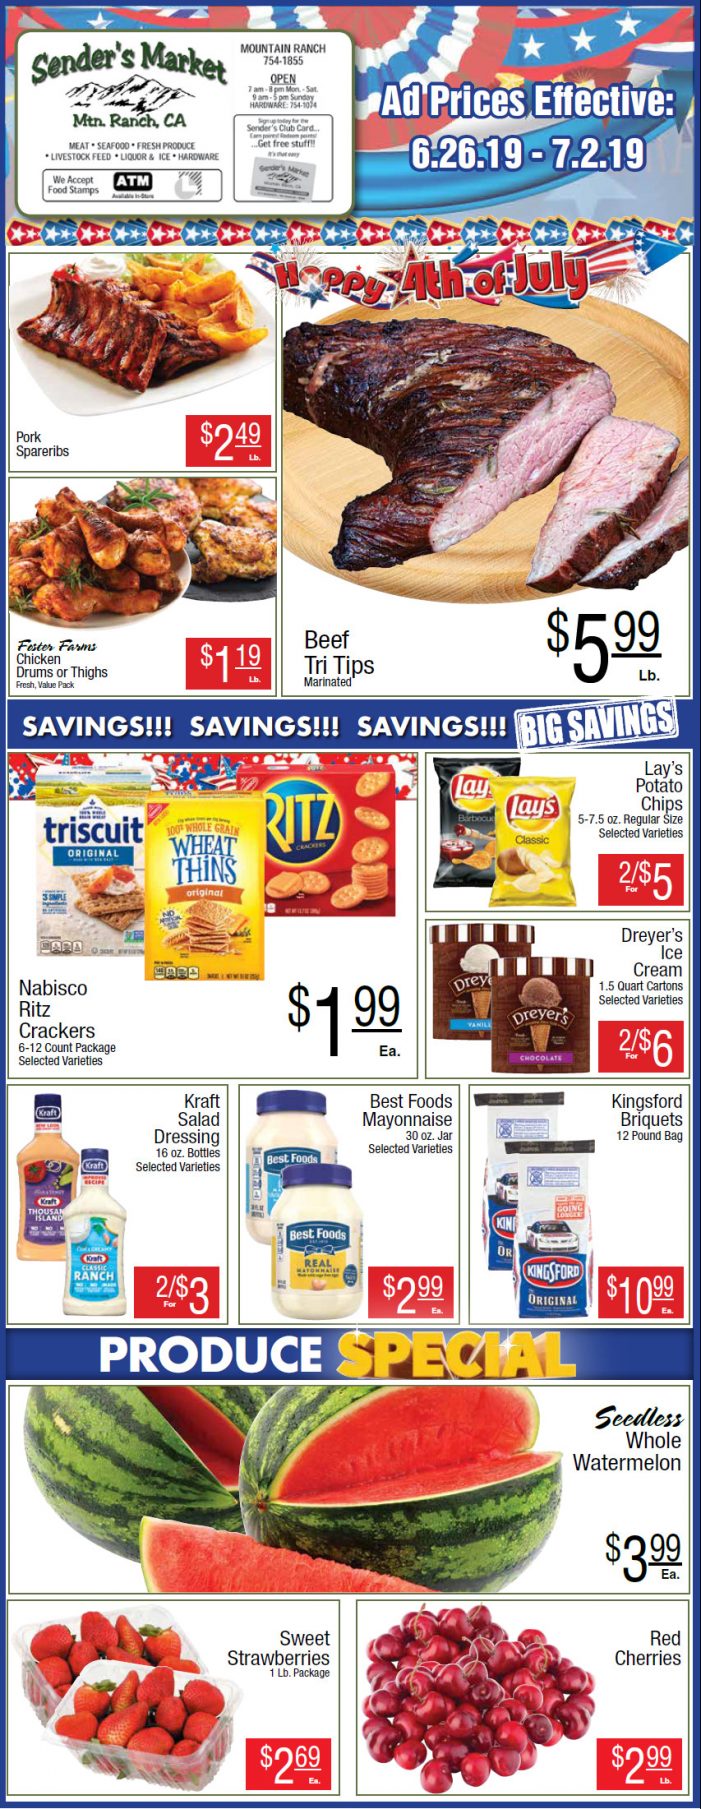 Sender’s Market Weekly Ad & Grocery Specials Through July 2nd!